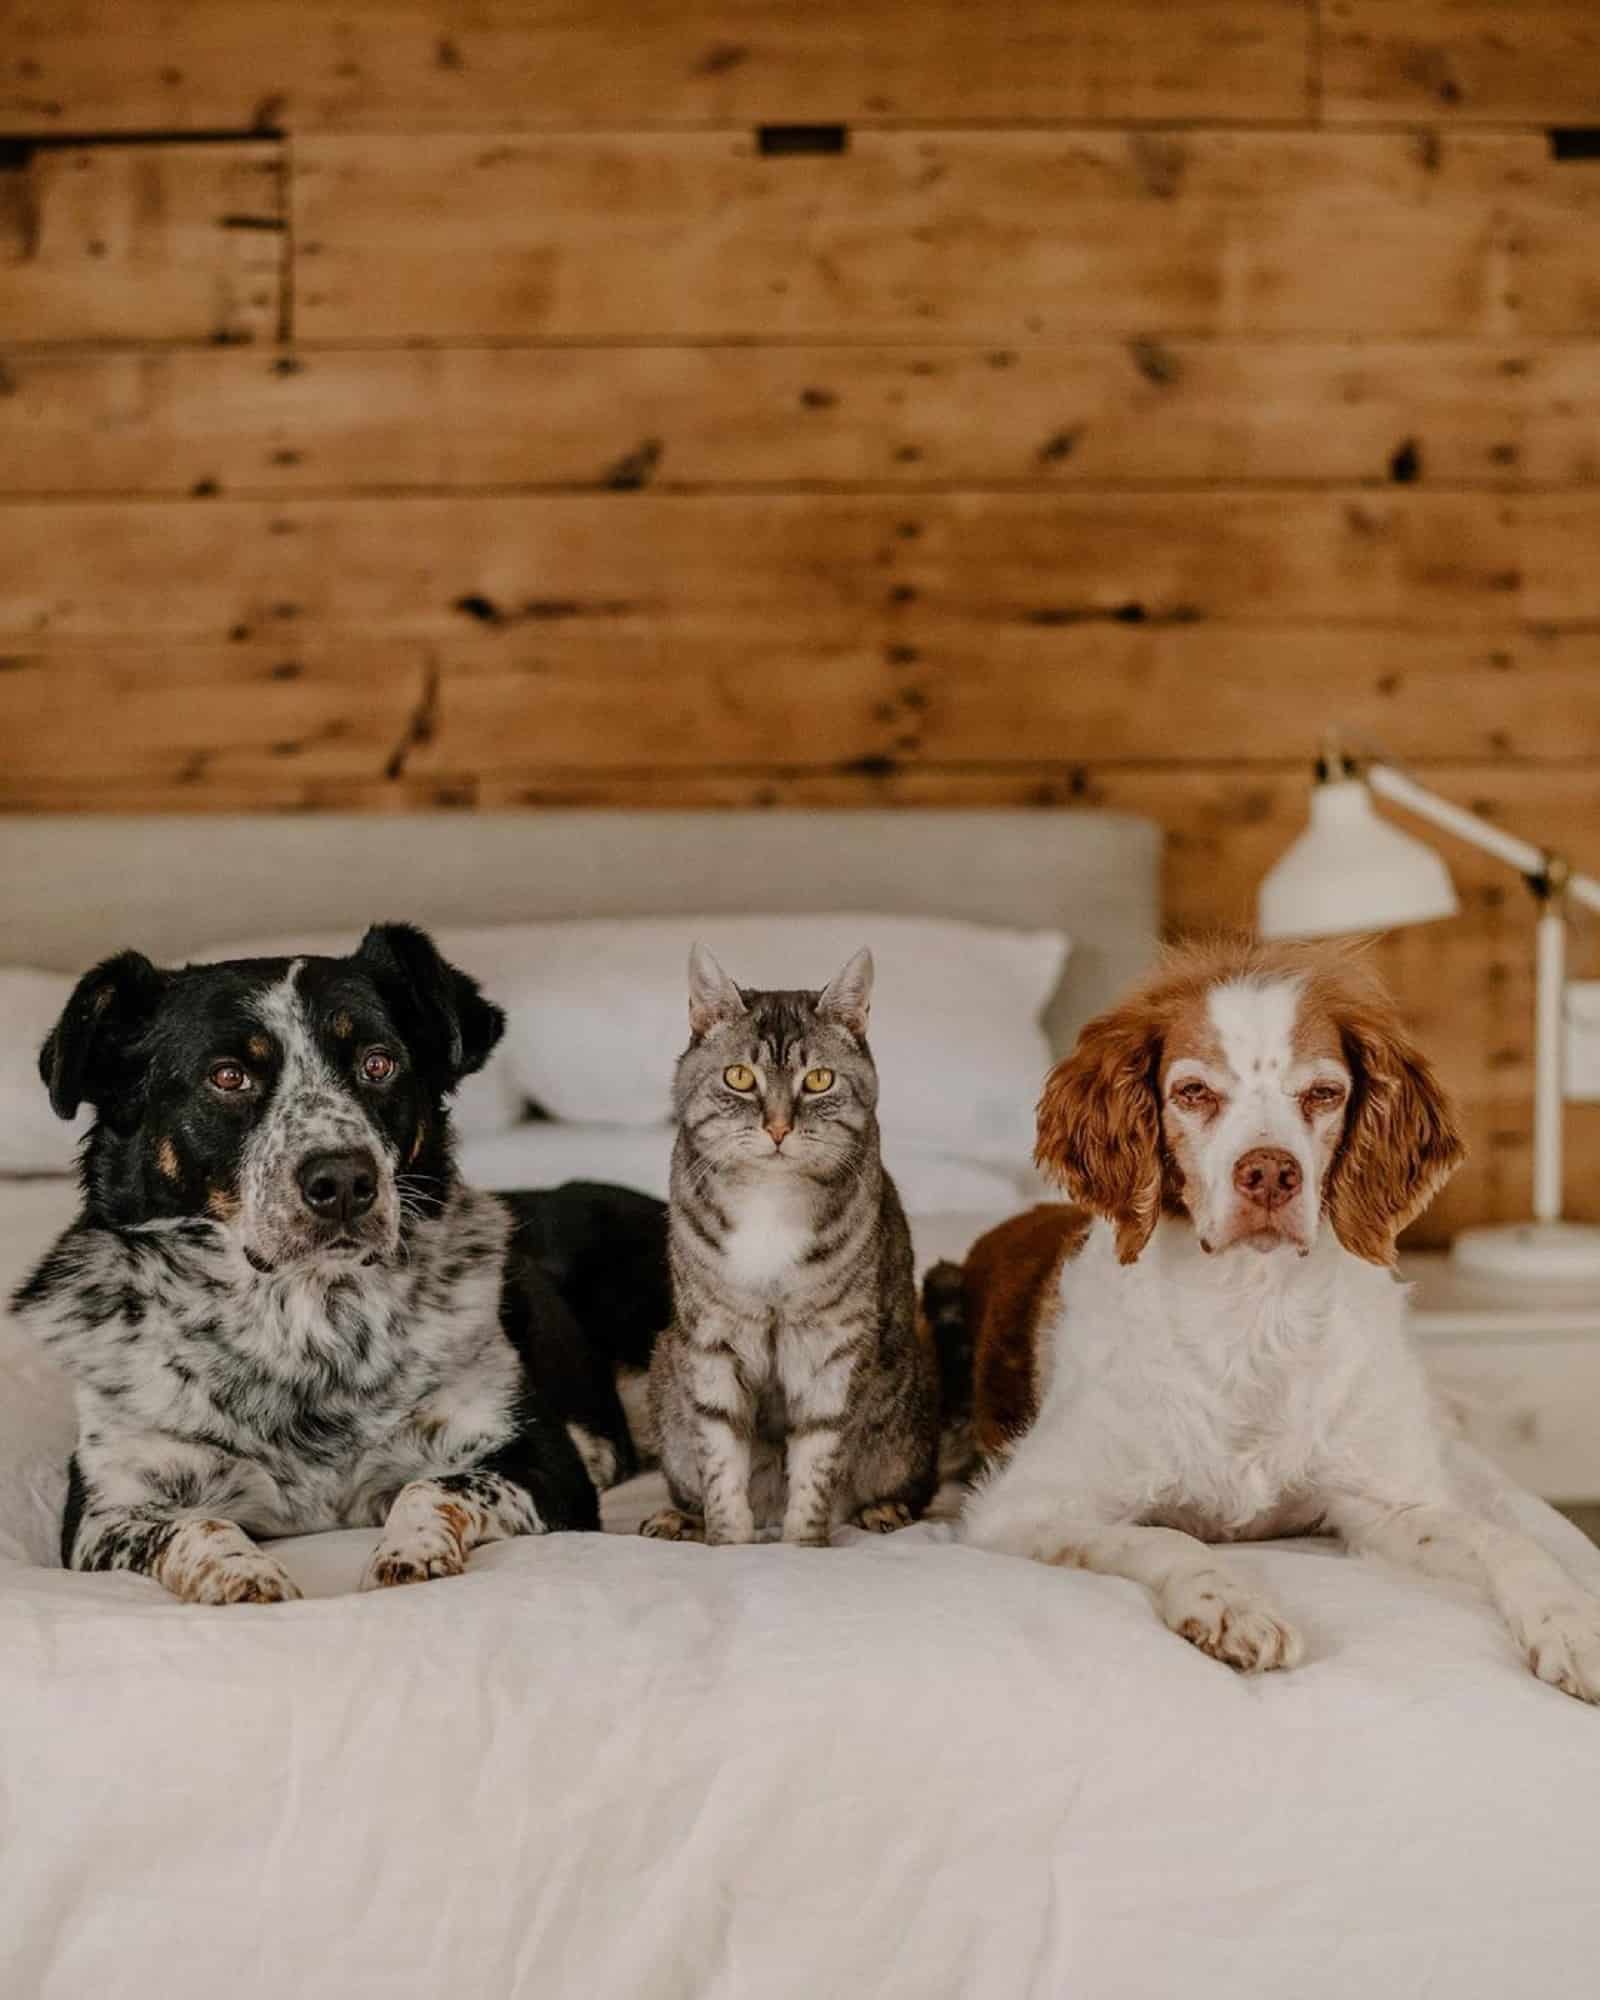 two dogs and cat lying on the bed together